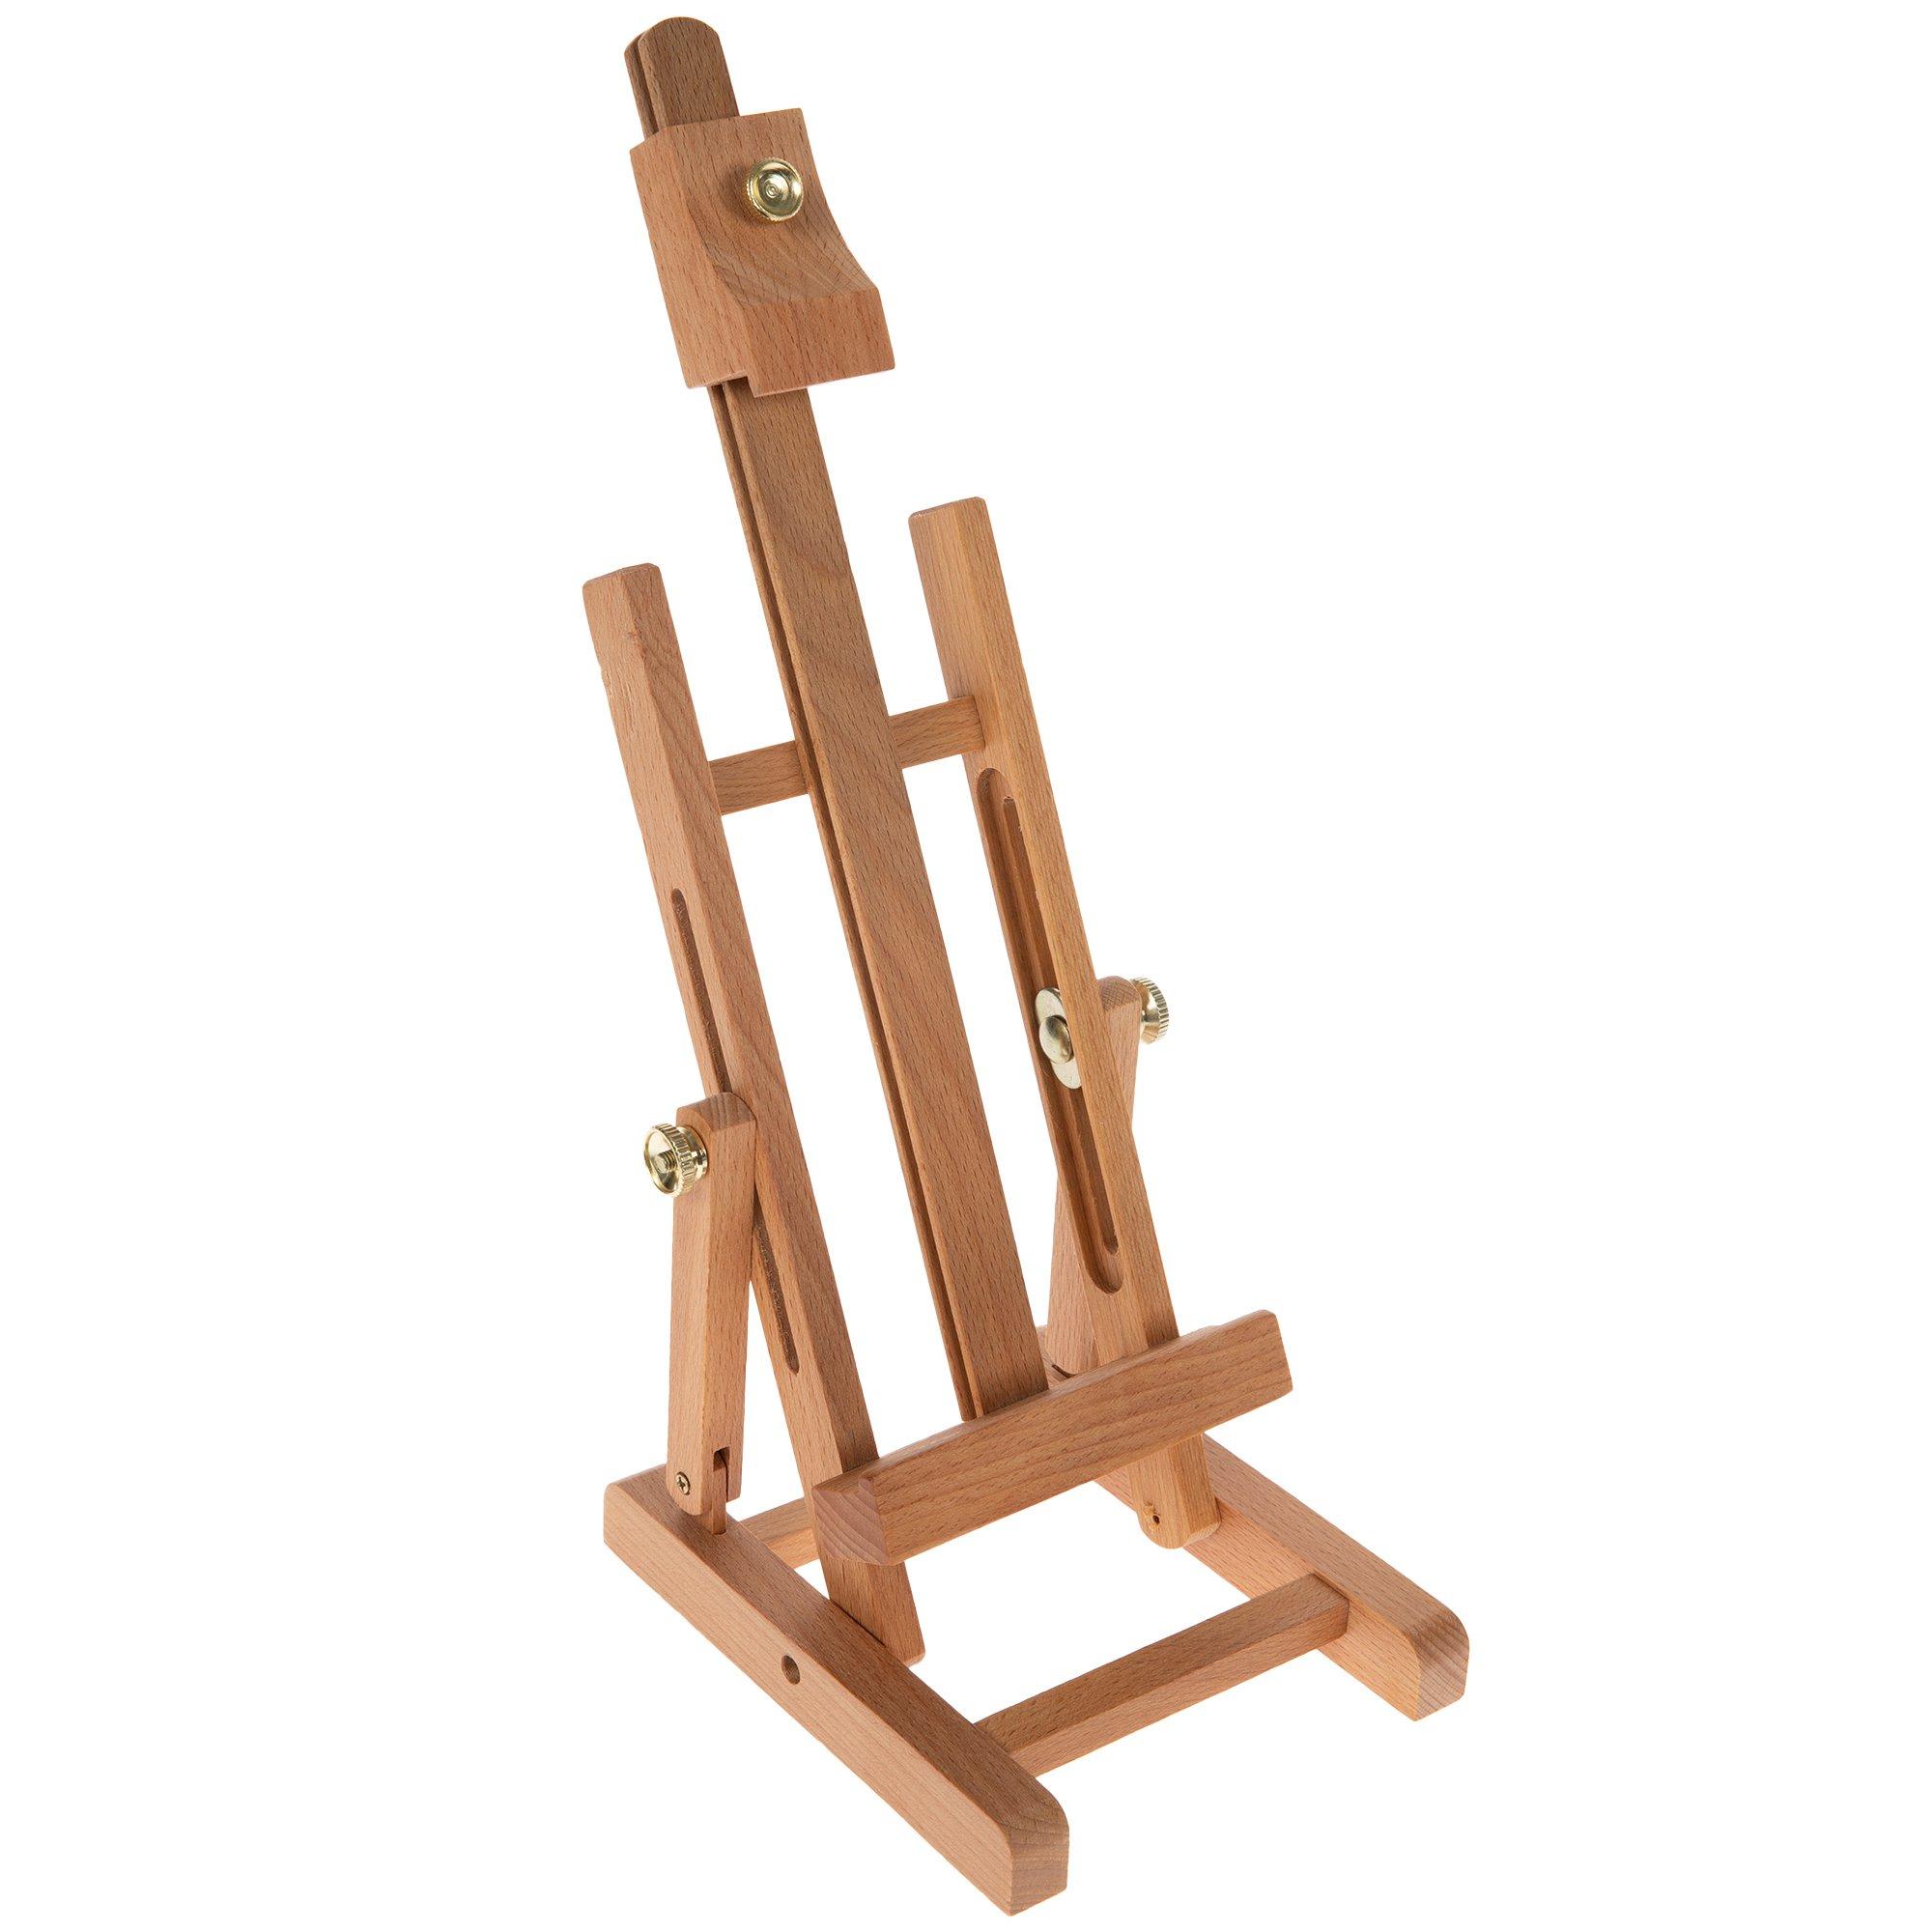 Louise Maelys Tabletop Easel Beechwood Art Easel for Painting Canvases Table Easel Stand for Painters Painting by Numbers, St